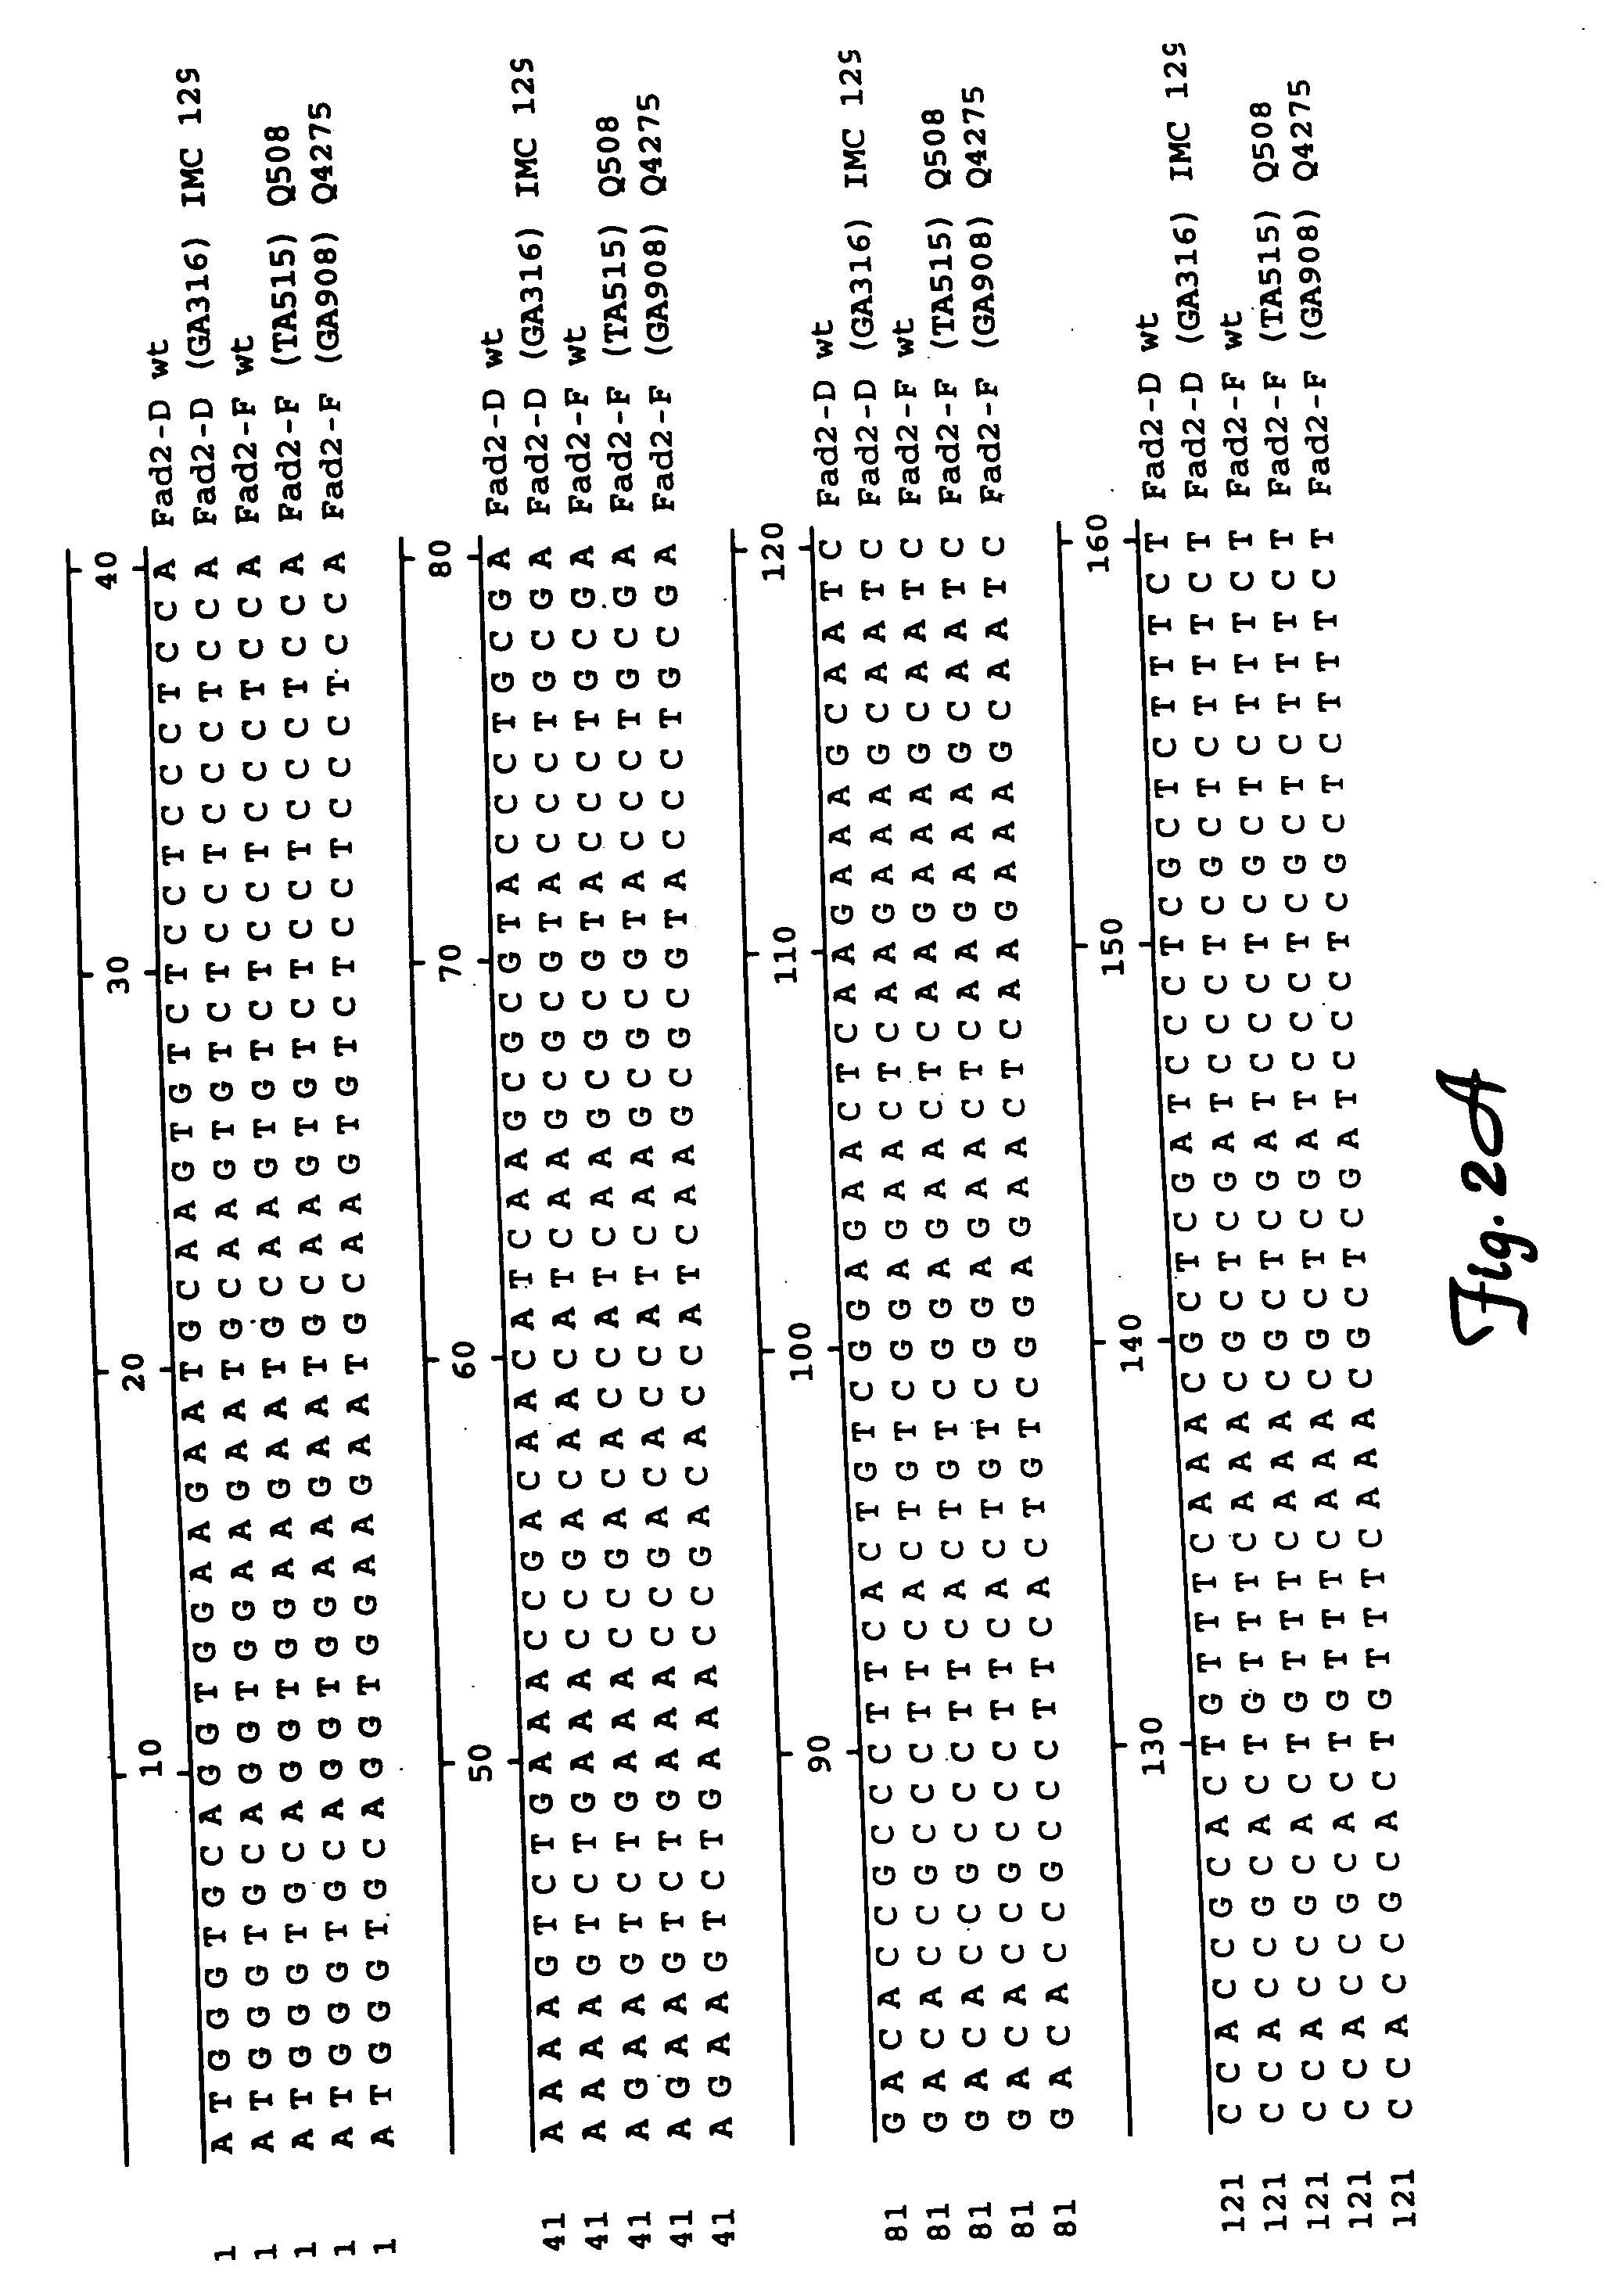 Fatty acid desaturases and mutant sequences thereof